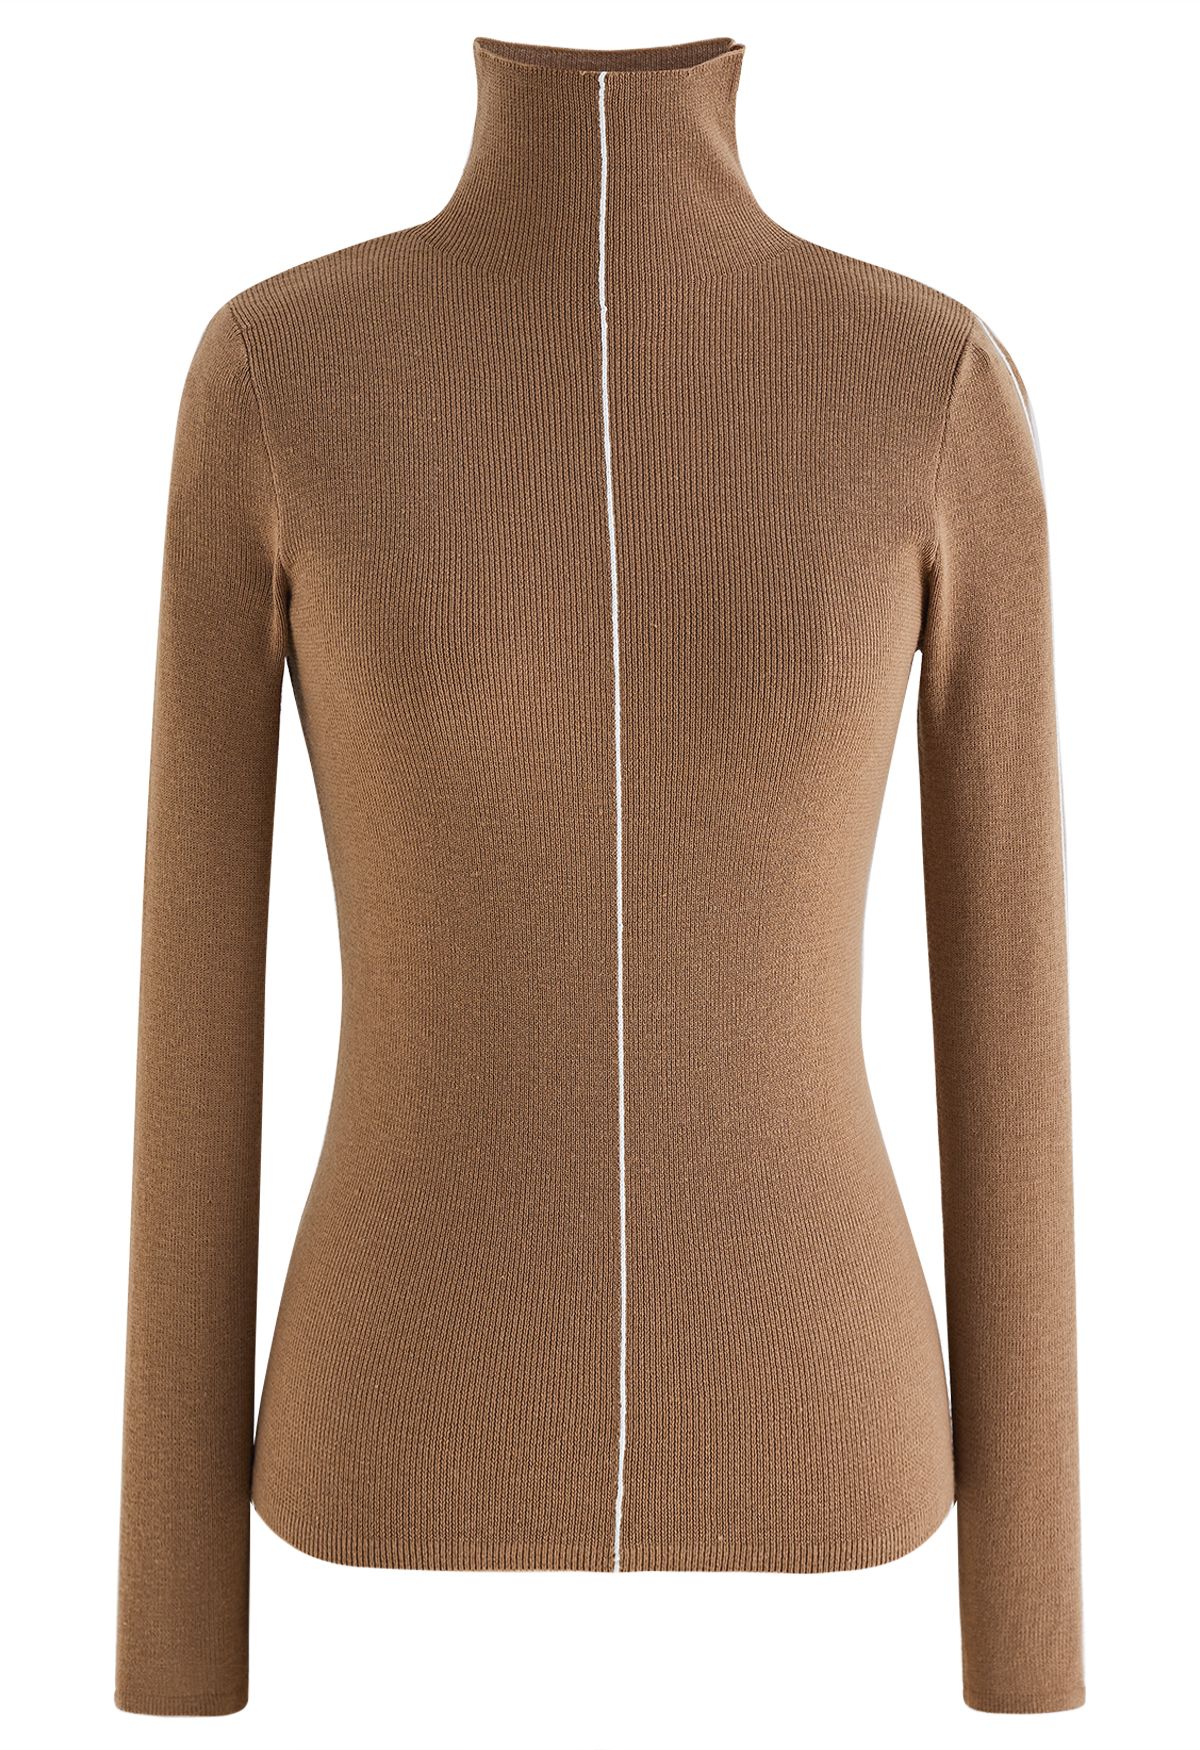 White Line High Neck Knit Top in Camel